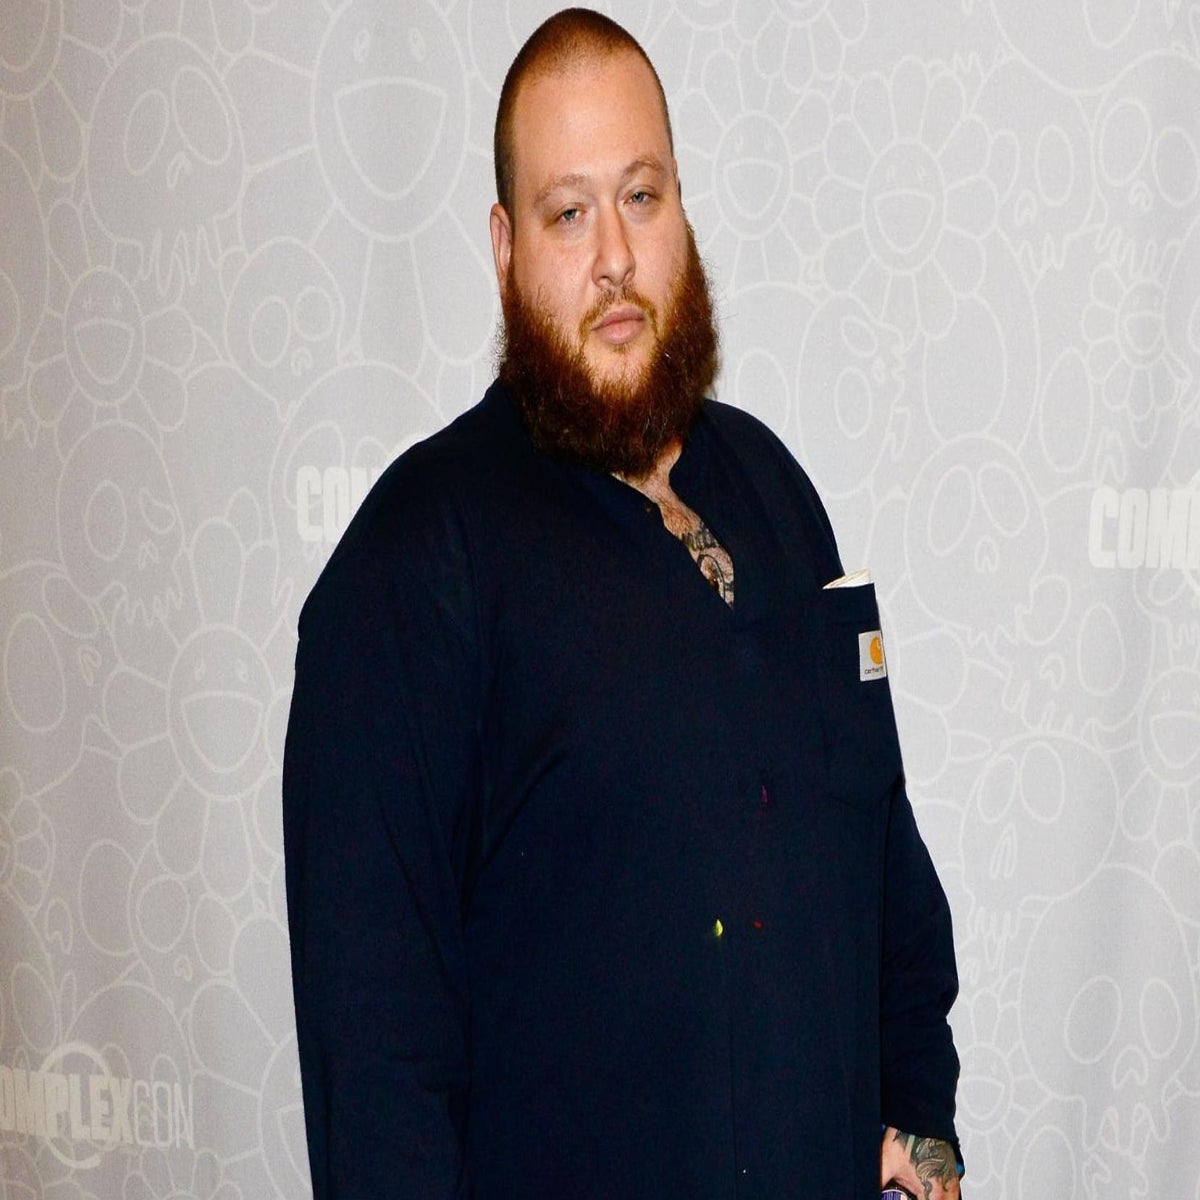 Action Bronson Workout and Diet: How He Lost 125+ Pounds!